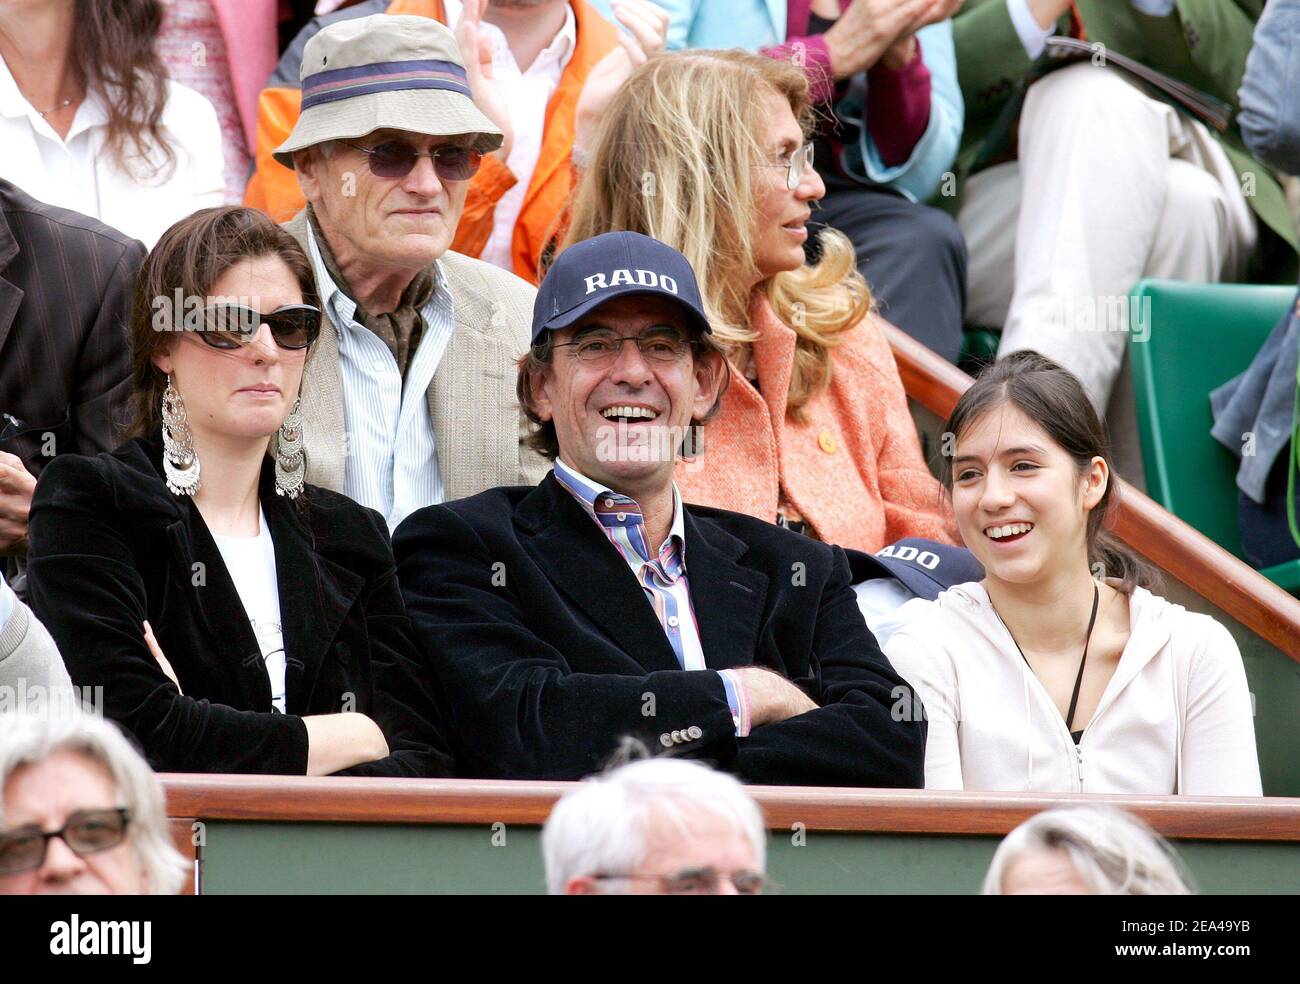 Luc Ferry with his wife and his daughter attend the men final of French Open at the Roland Garros stadium between Spain's Rafael Nadal and Argentin's Mariano Puerta in Paris, France on June 05, 2005. Photo by Gorassini-Zabulon/ABACA. Stock Photo